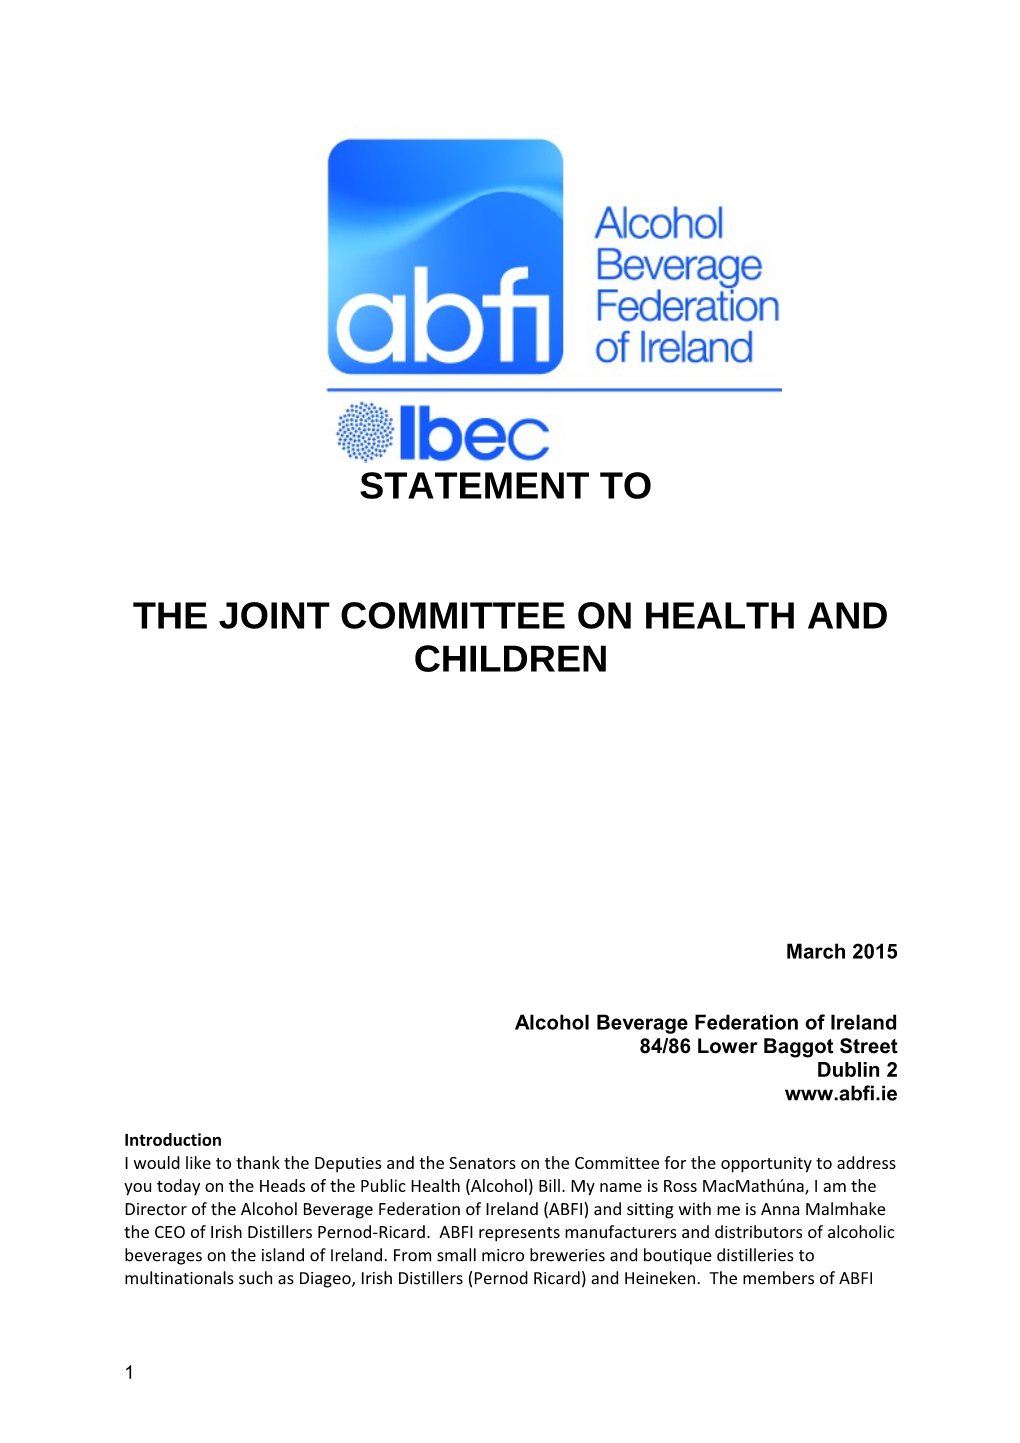 The Joint Committee on HEALTH and CHILDREN